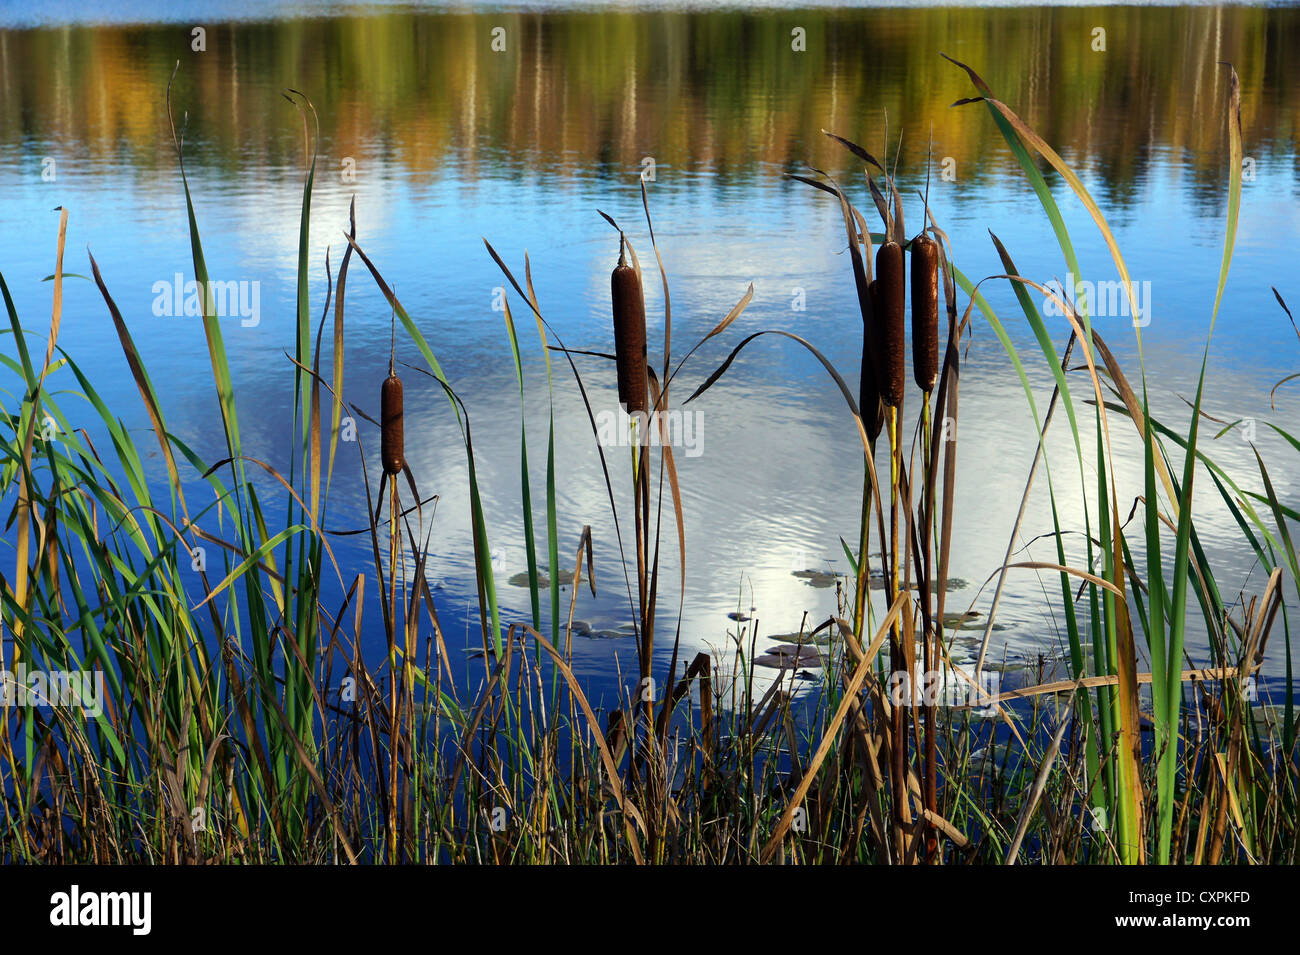 Cane and lake on a background of reflections of the sky Stock Photo